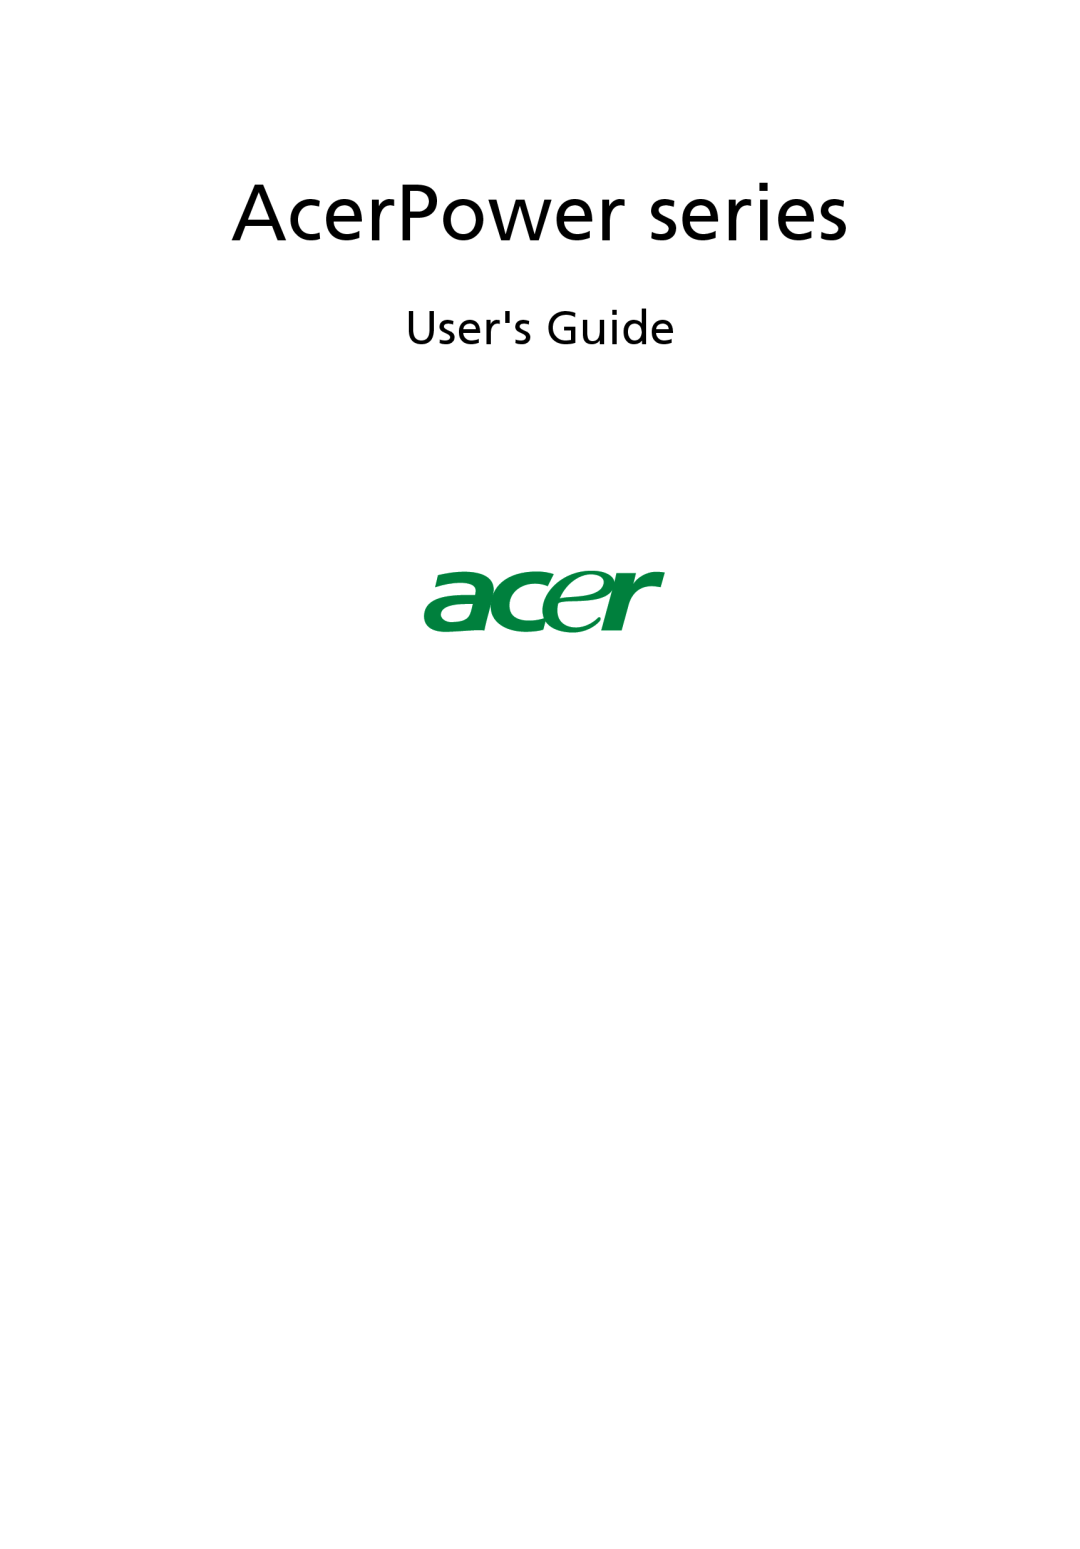 Acer POWER SERIES manual Users Guide, AcerPower series 